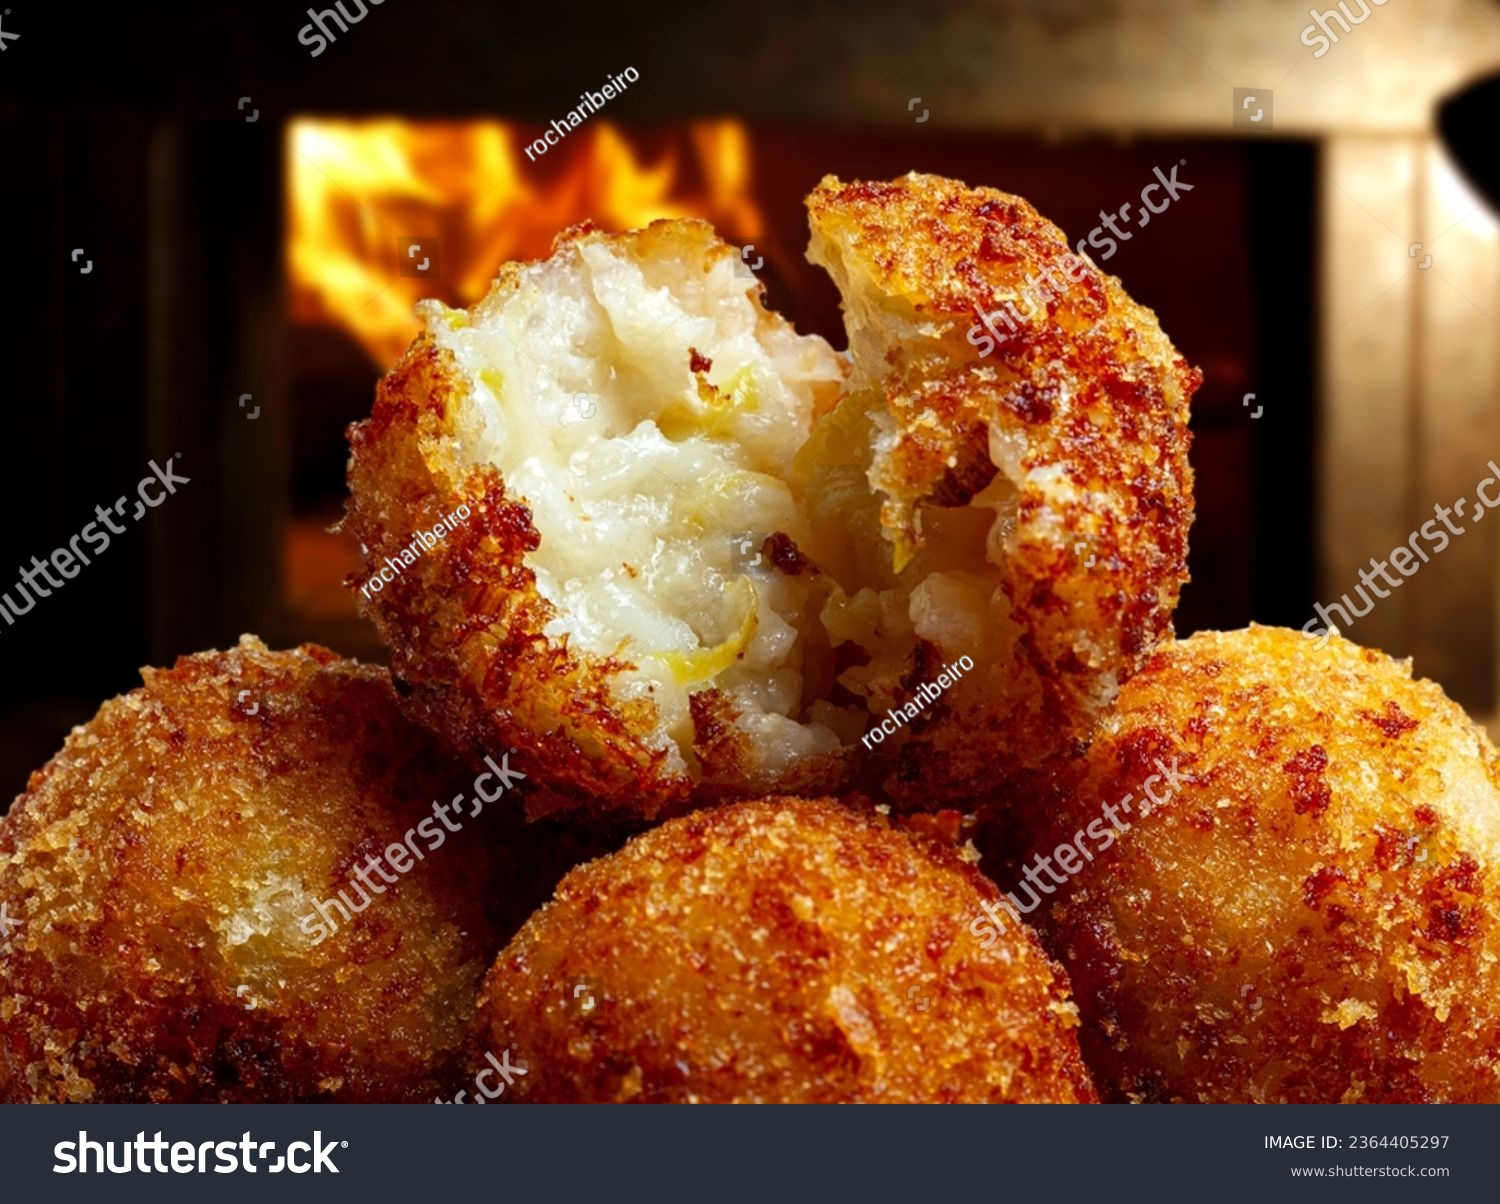 Fried rice balls. Traditional from Brazil where it is called Bolinho de arroz. #2364405297